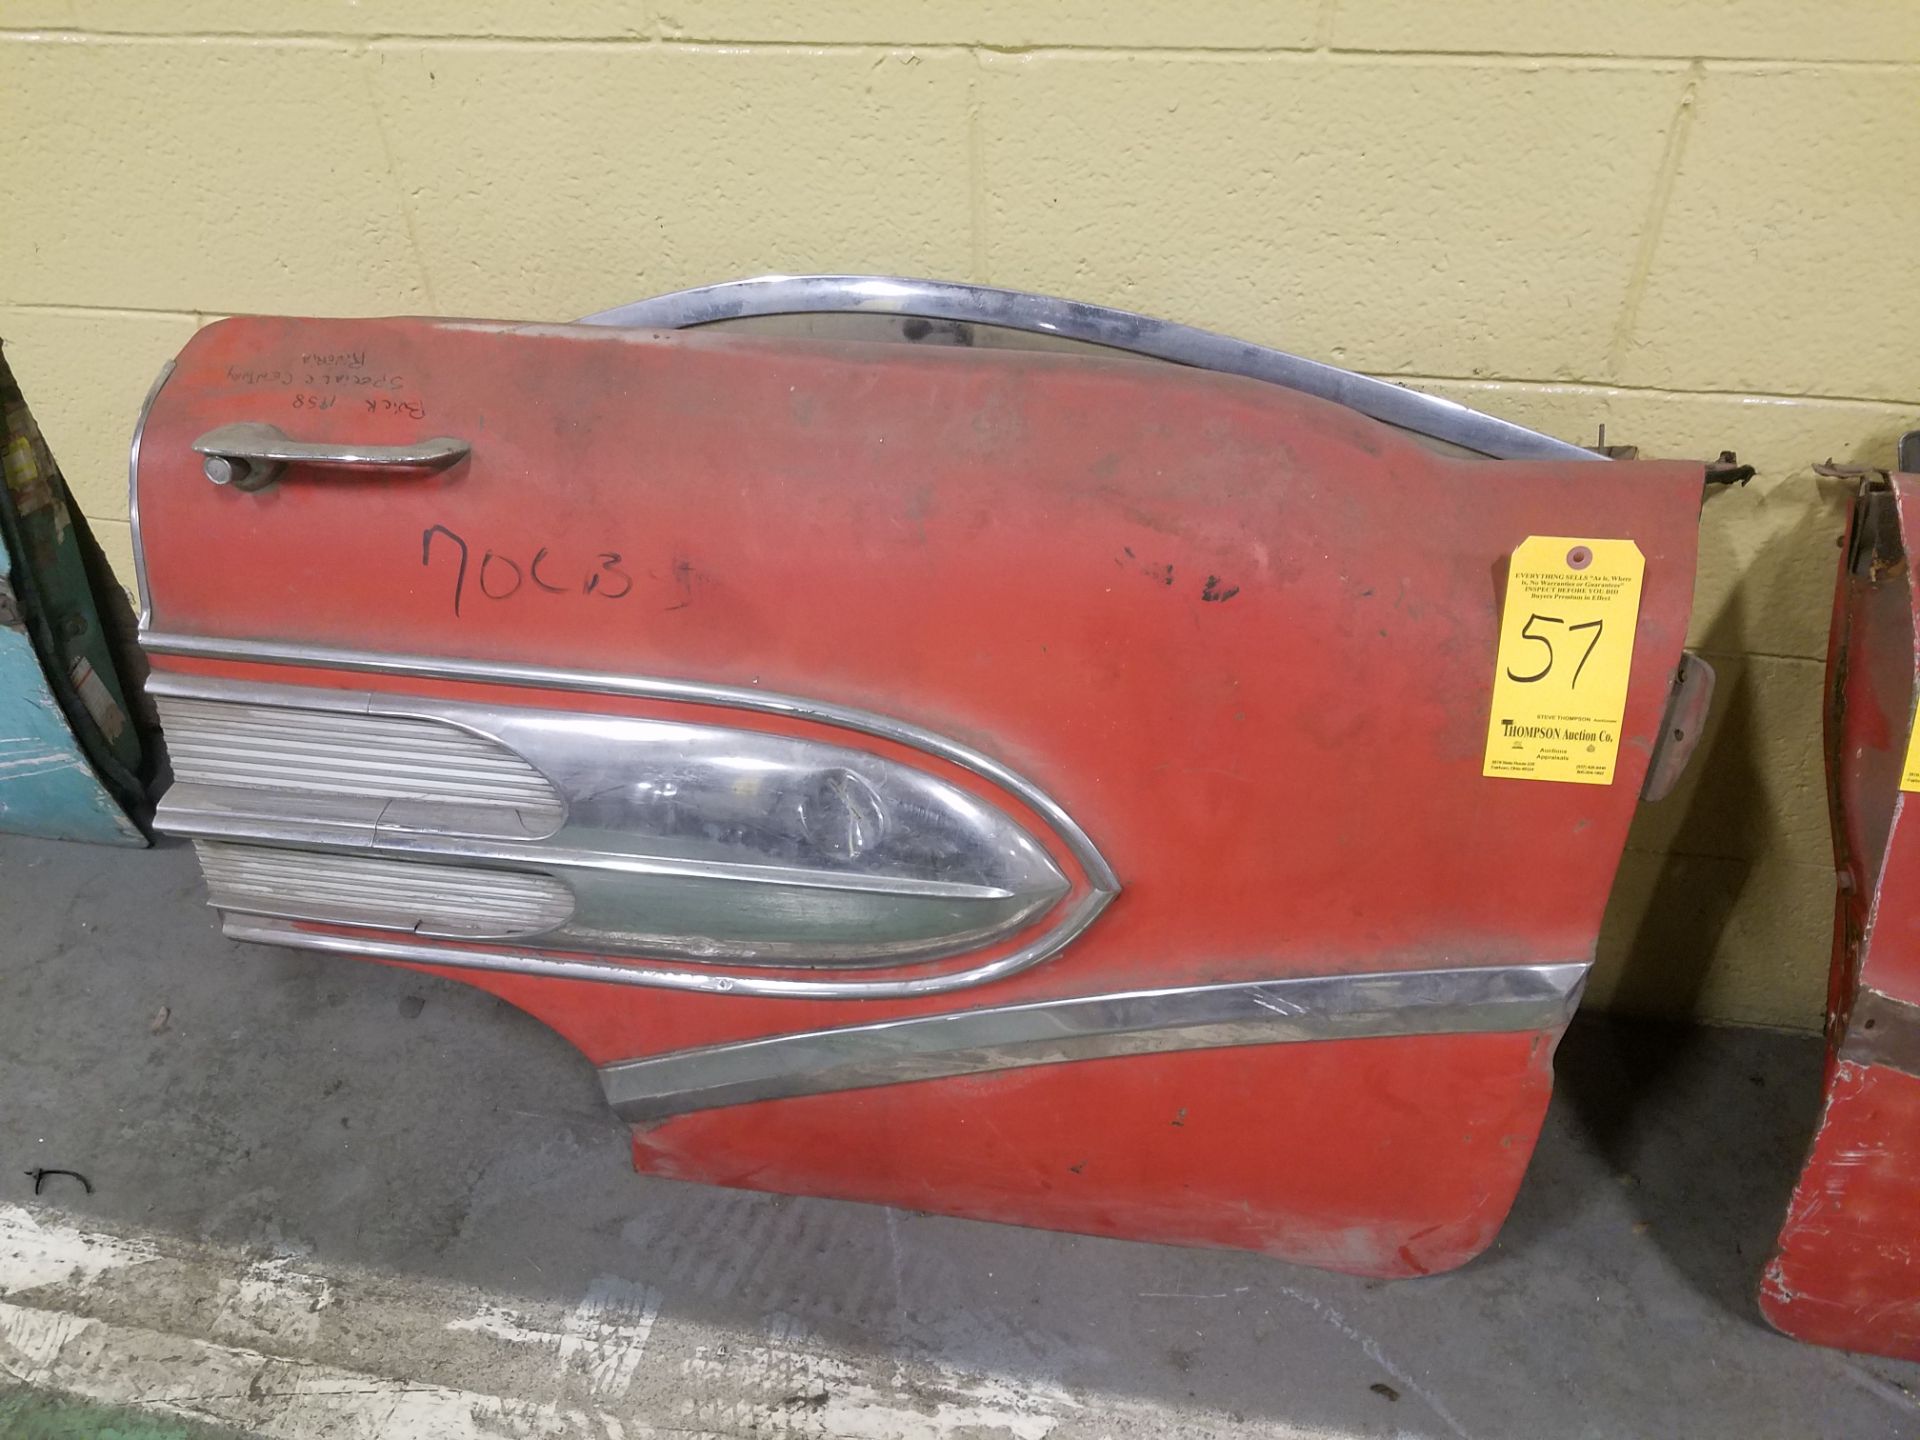 1958 Buick Century Special Right and Left Rear Doors - Image 2 of 2